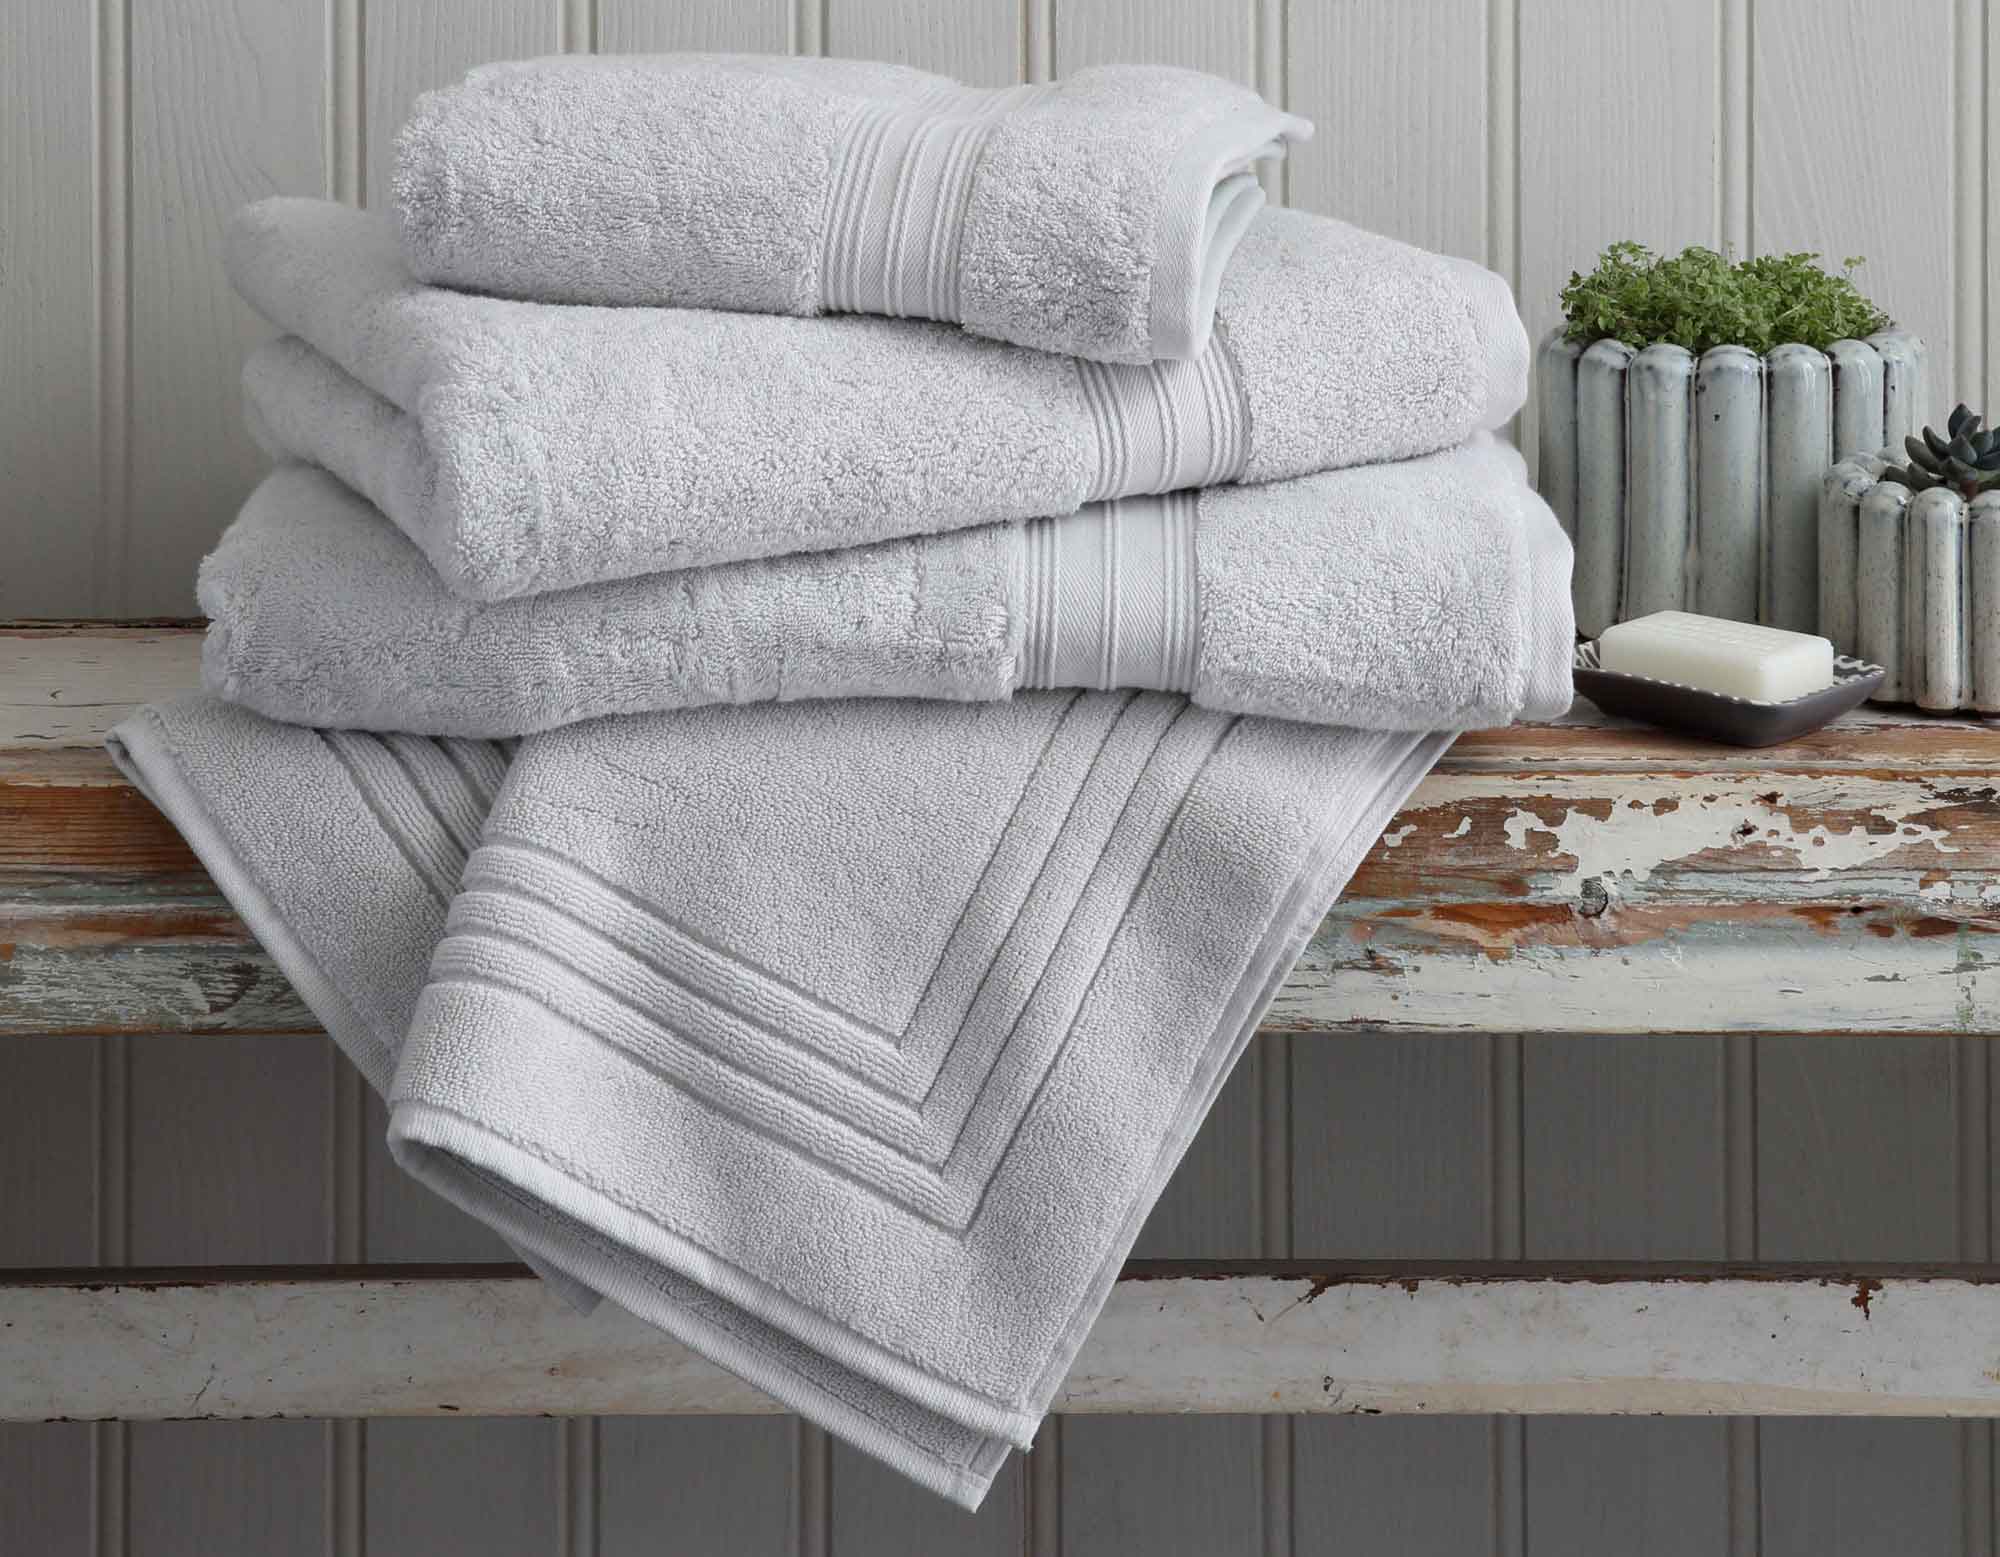 Bundle of grey towels on a wooden bench